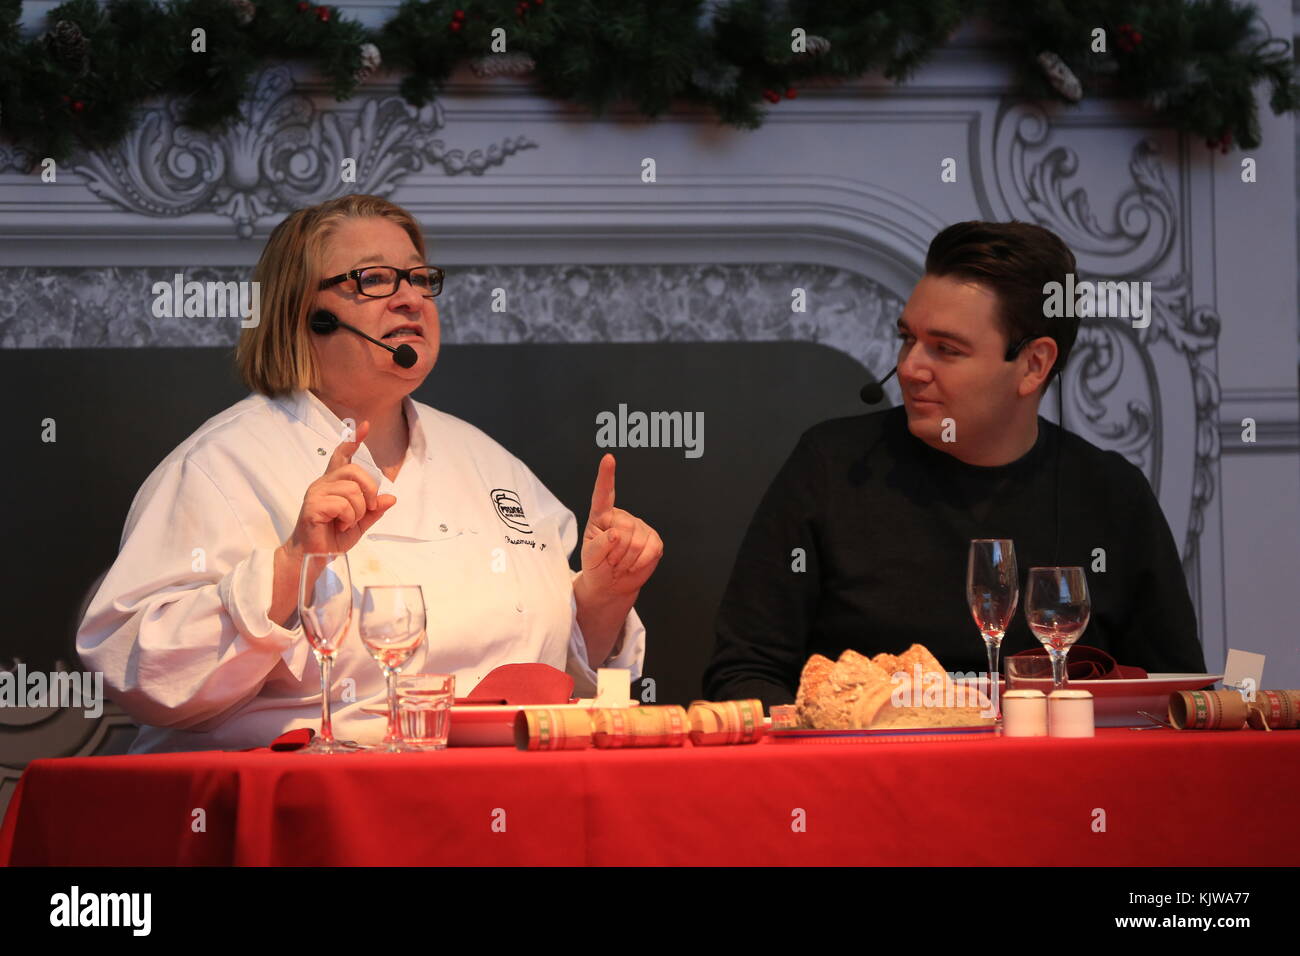 Final day of The Ideal Home Show at Christmas 2017, featuring professional chefs Theo Randall and Rosemary Shrager Stock Photo